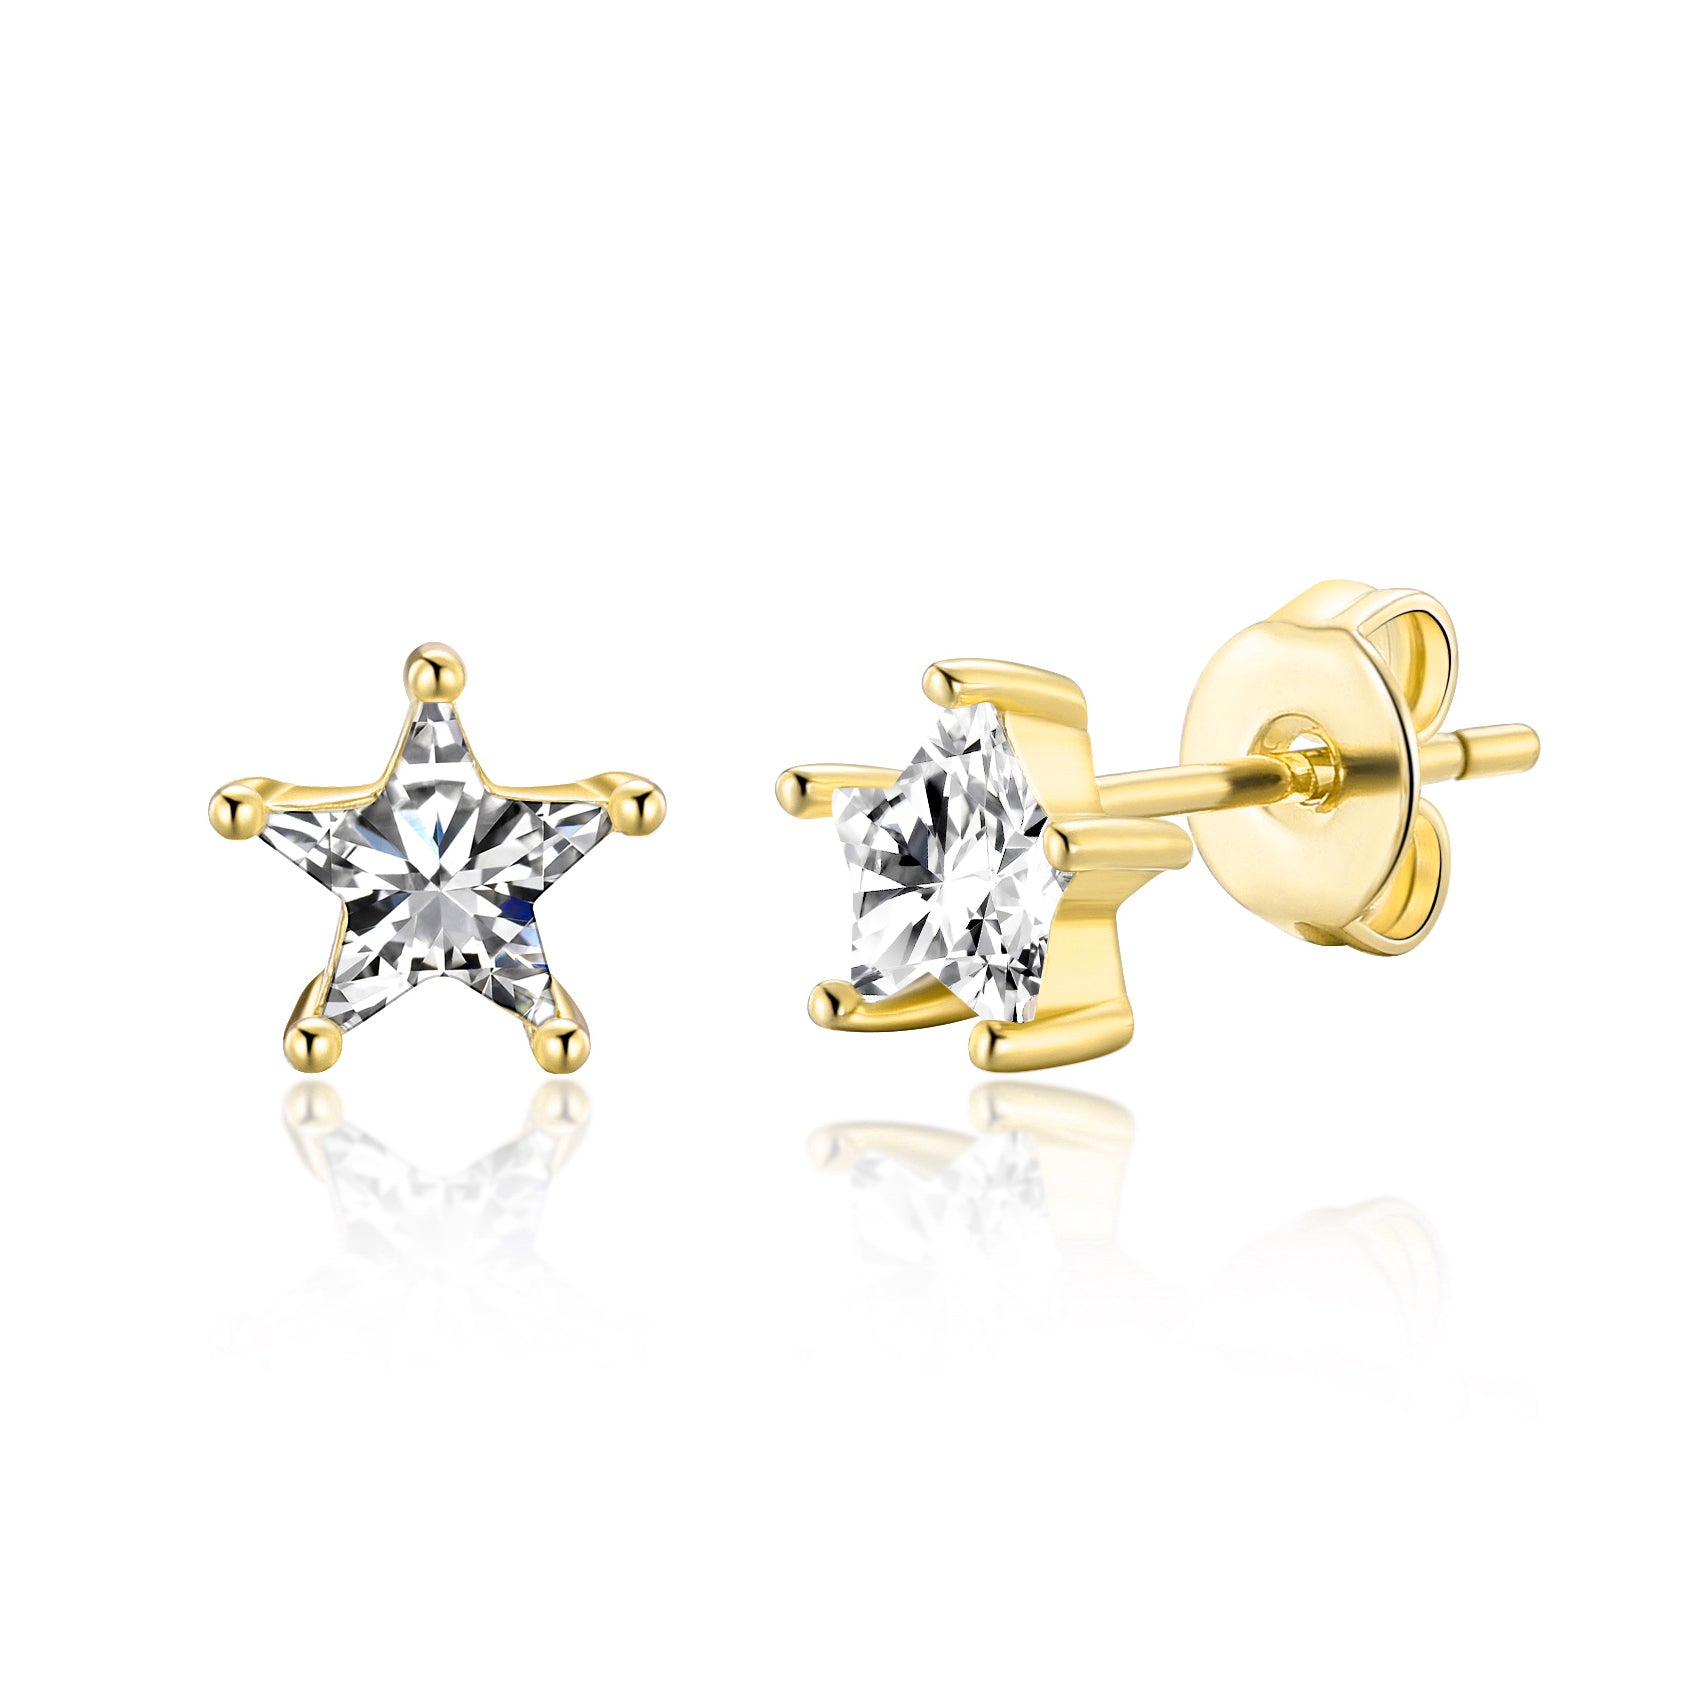 Gold Plated Star Earrings Created with Zircondia® Crystals by Philip Jones Jewellery